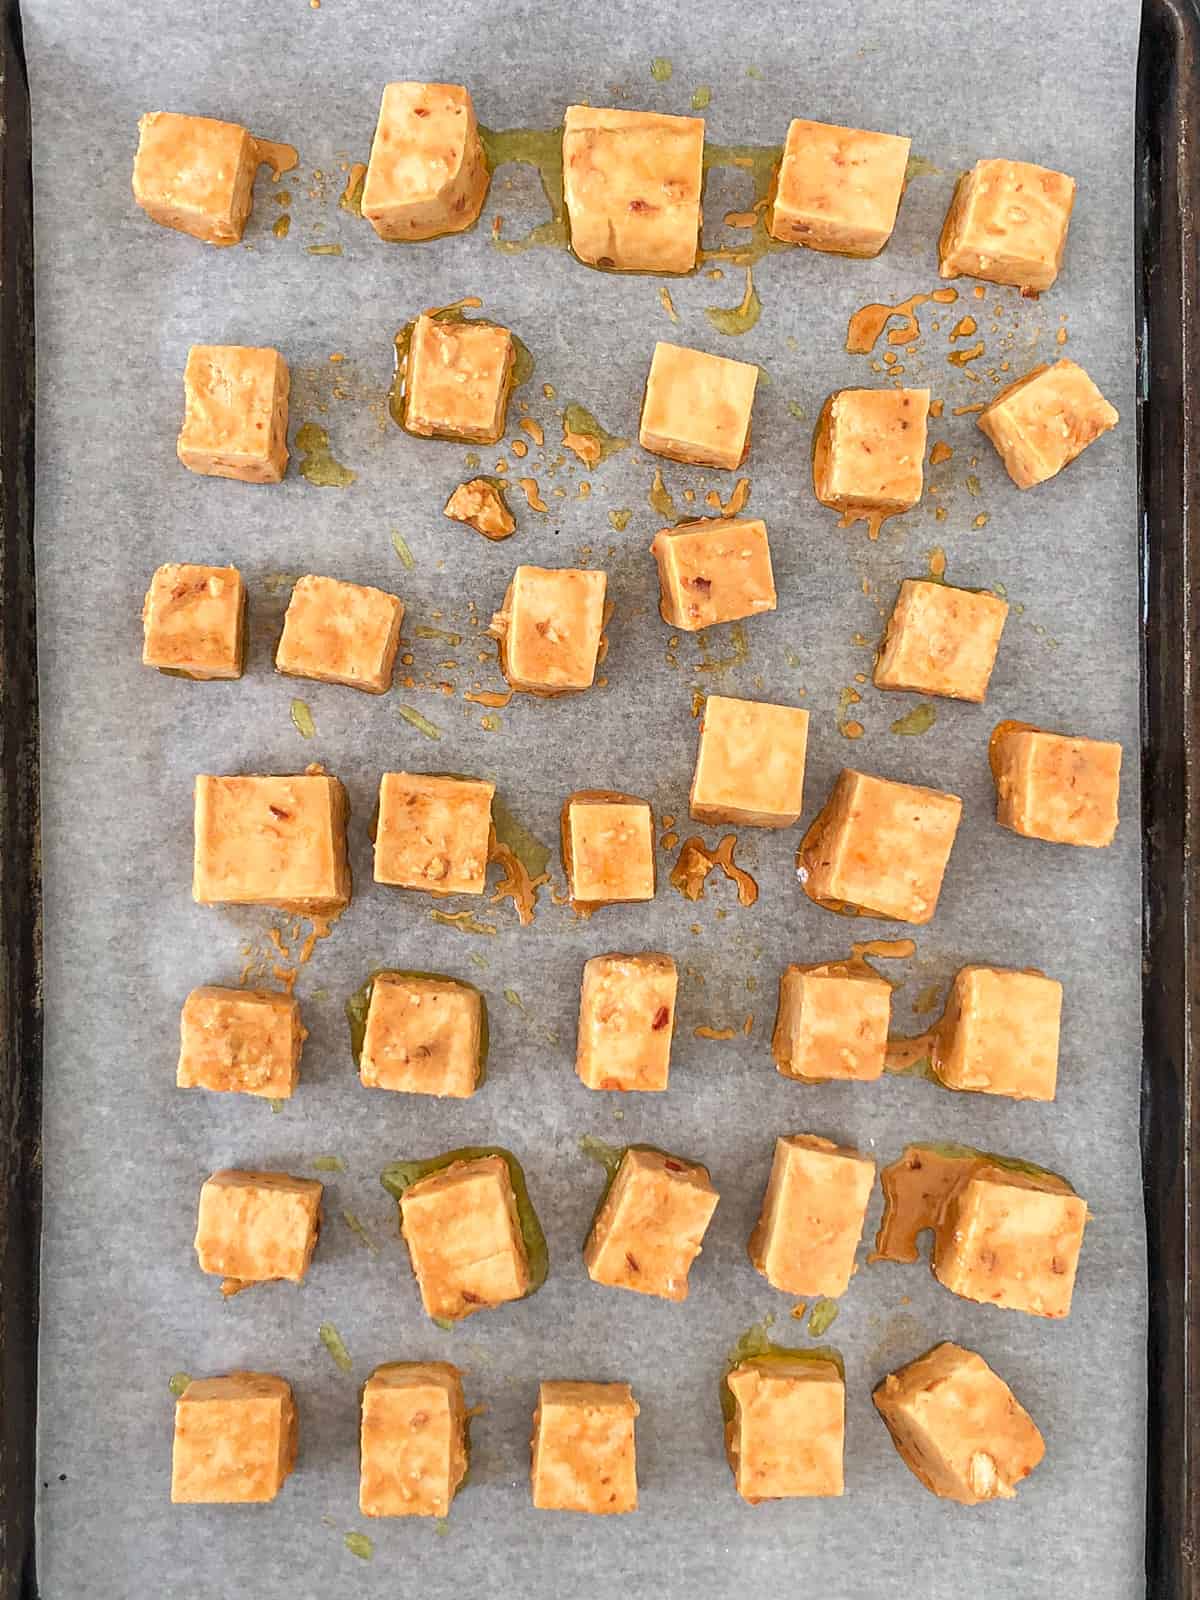 Tofu cubes before and after being baked.